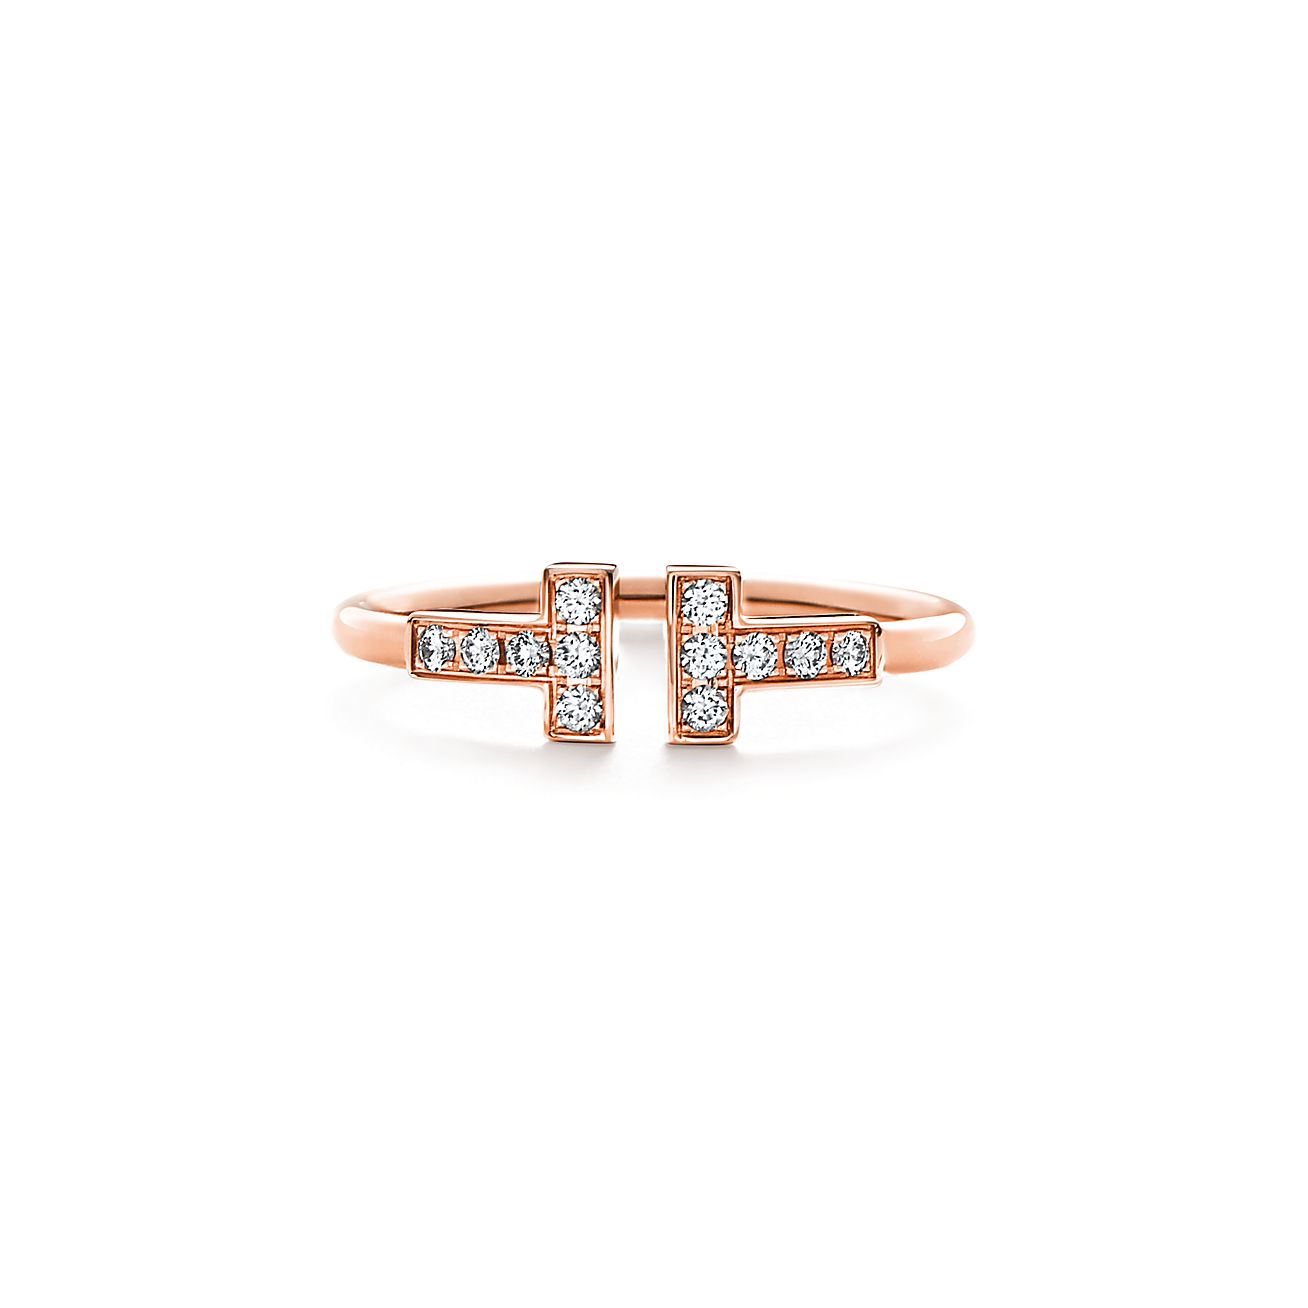 Tiffany TDiamond Wire Ring
in 18k Rose Gold